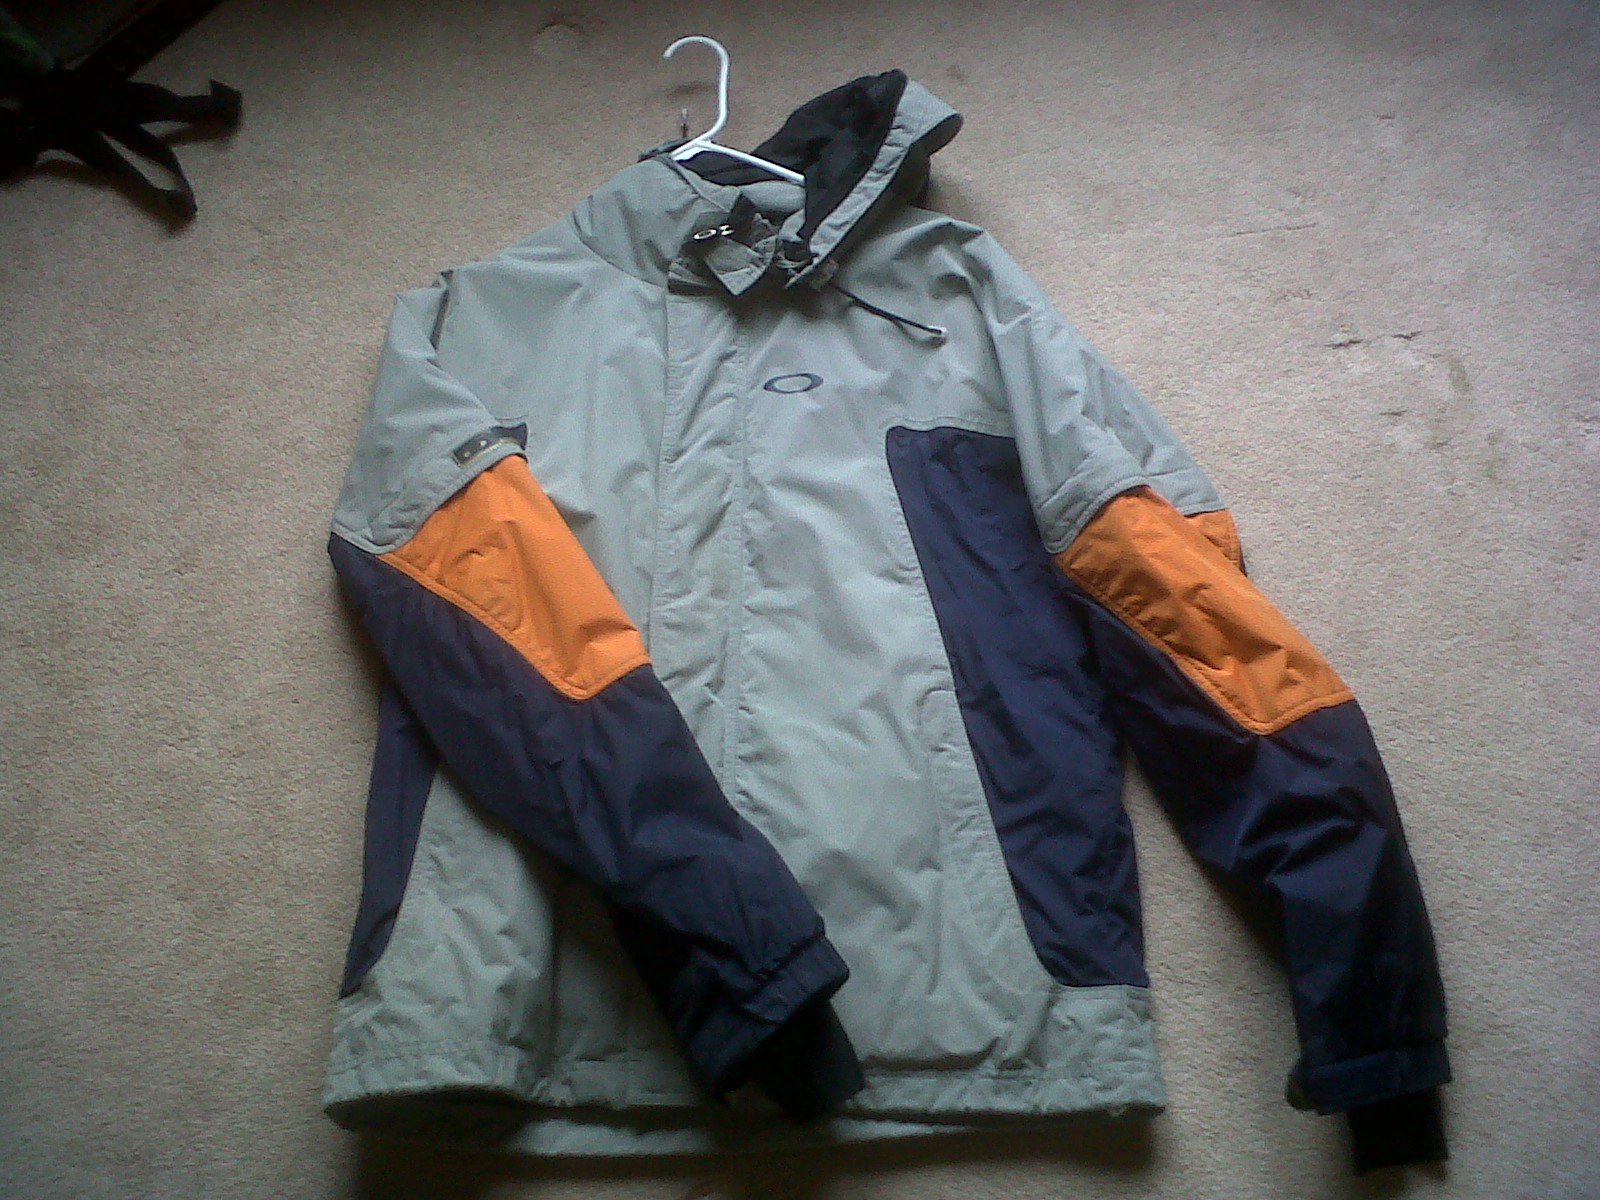 Oakley jacket for sale, check thread